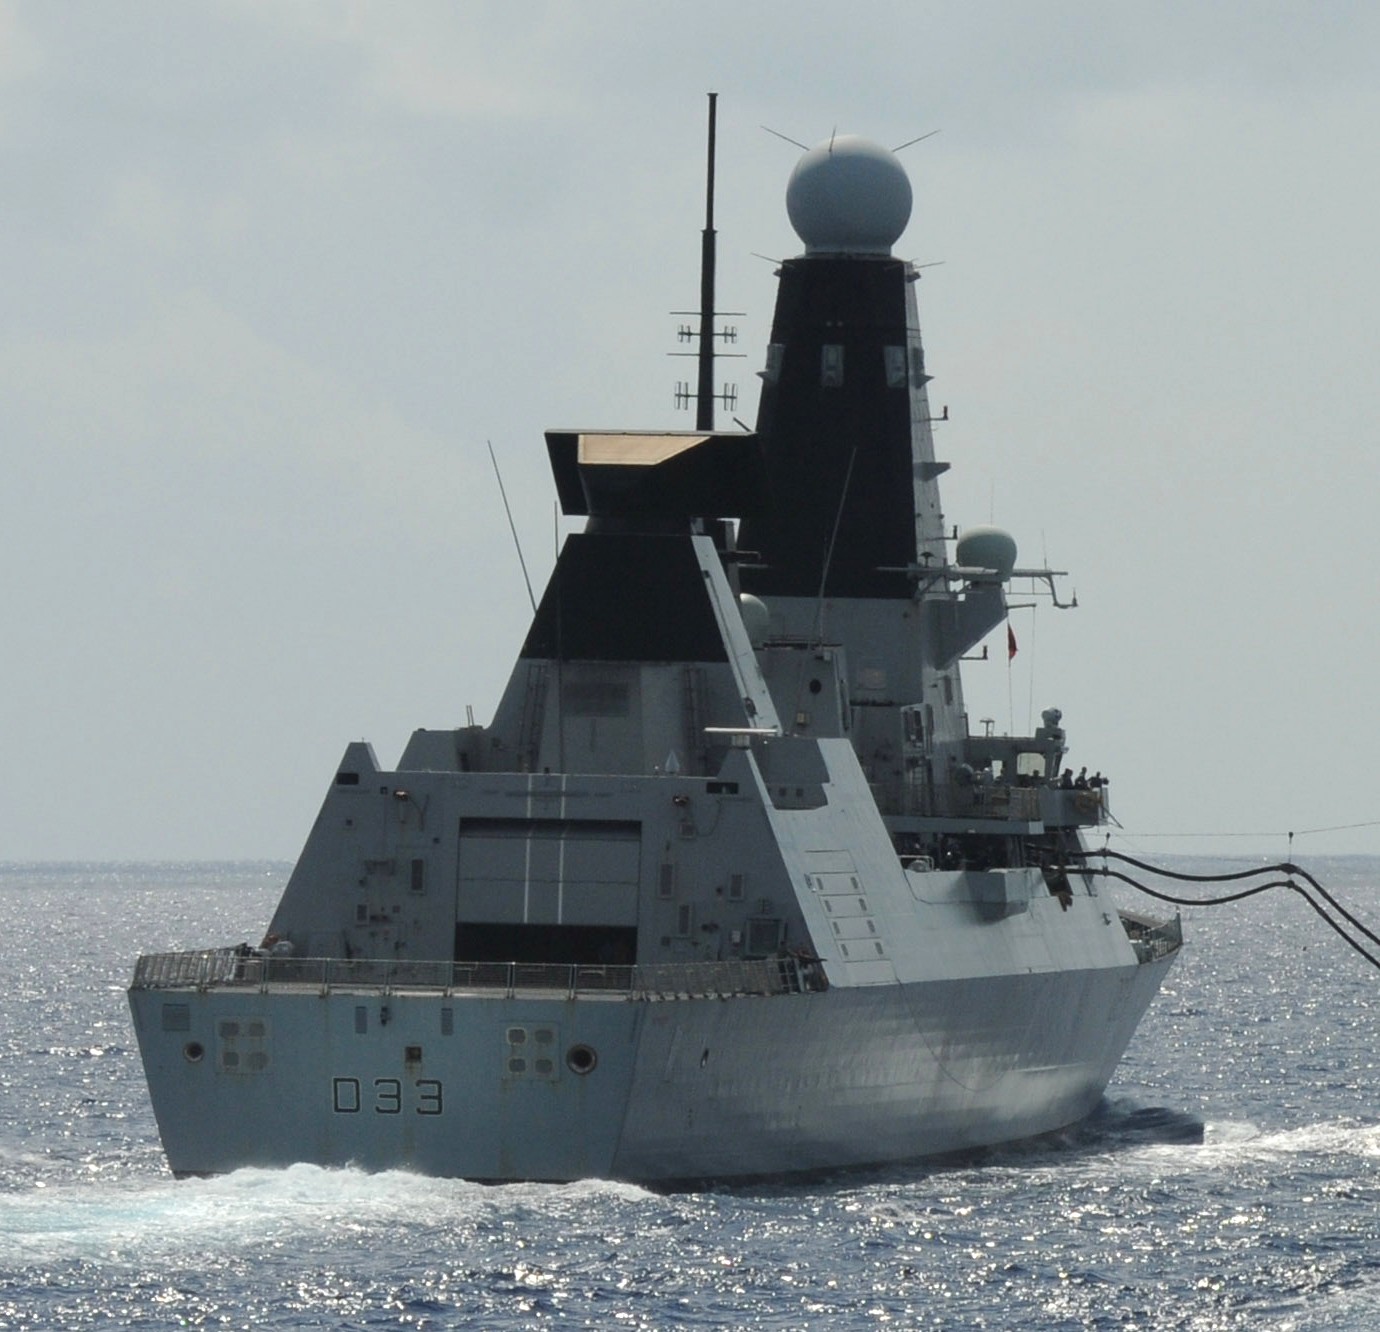 hms dauntless d-33 type 45 daring class guided missile destroyer royal navy sea viper paams 04